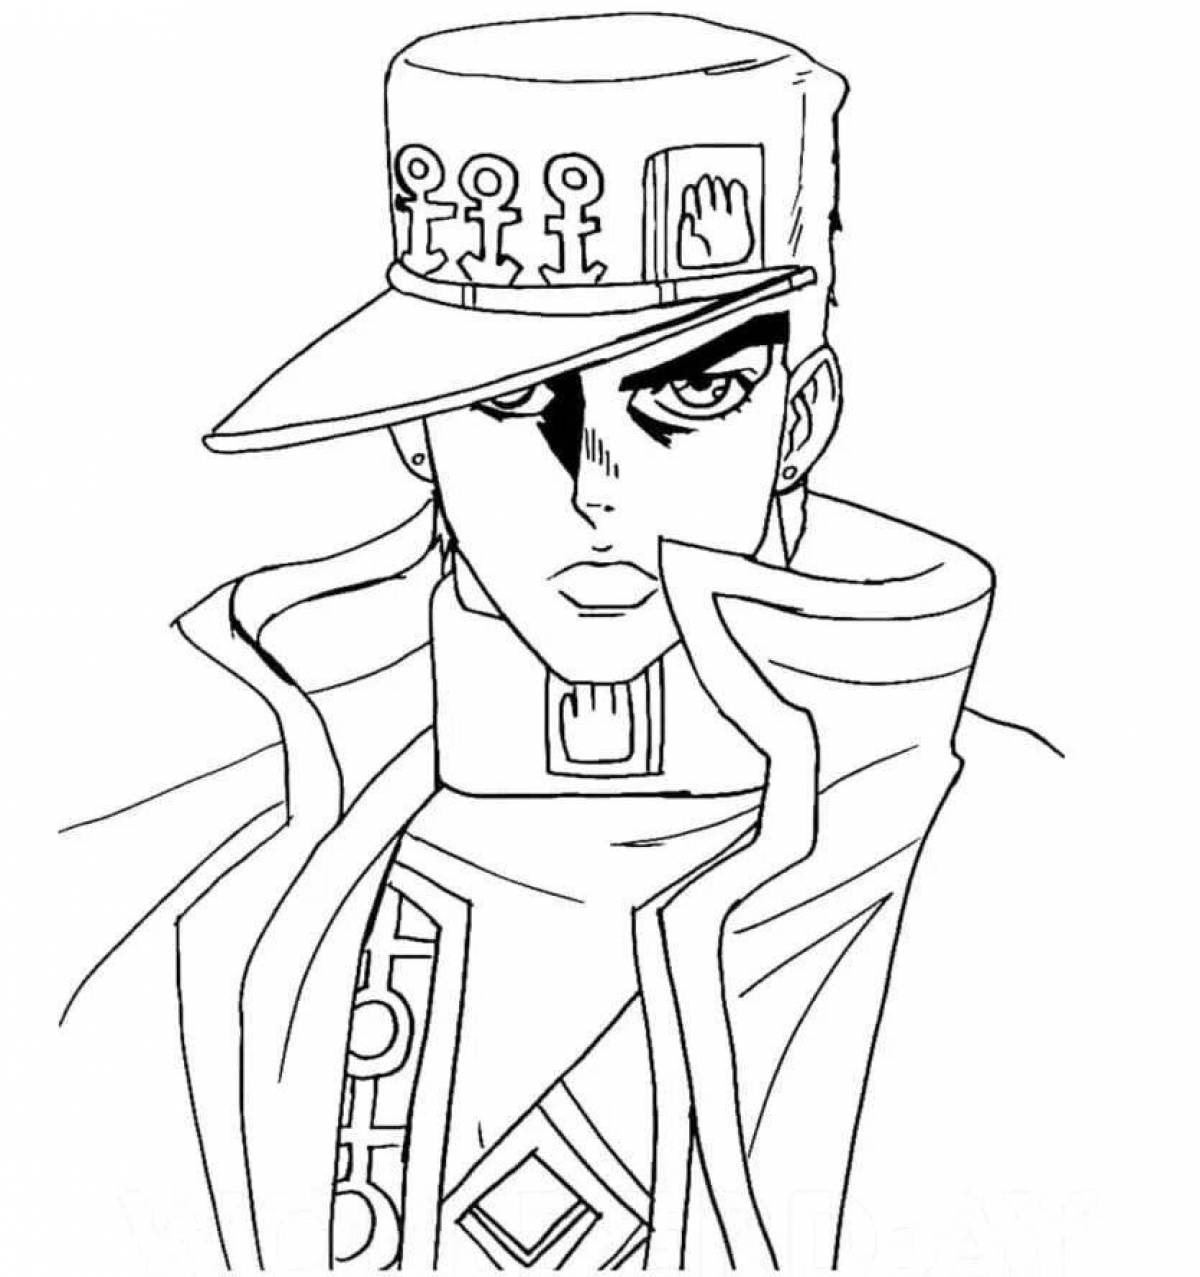 Jotaro coloring pages